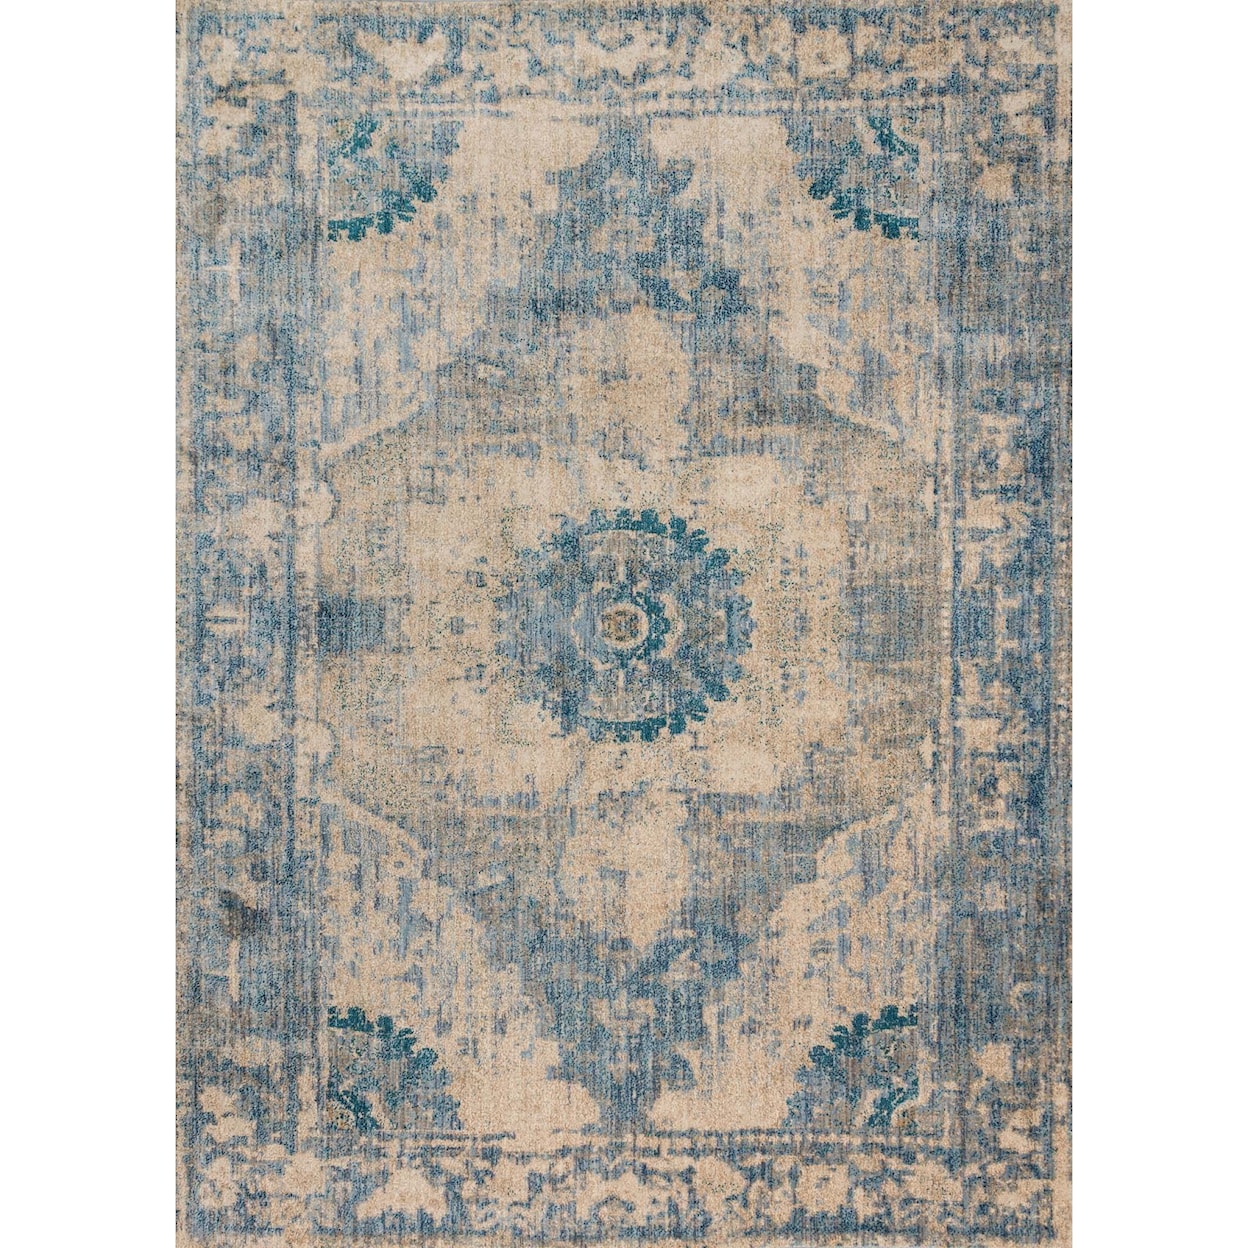 Magnolia Home by Joanna Gaines for Loloi Kivi 7' 10" X 7' 10" Round Rug